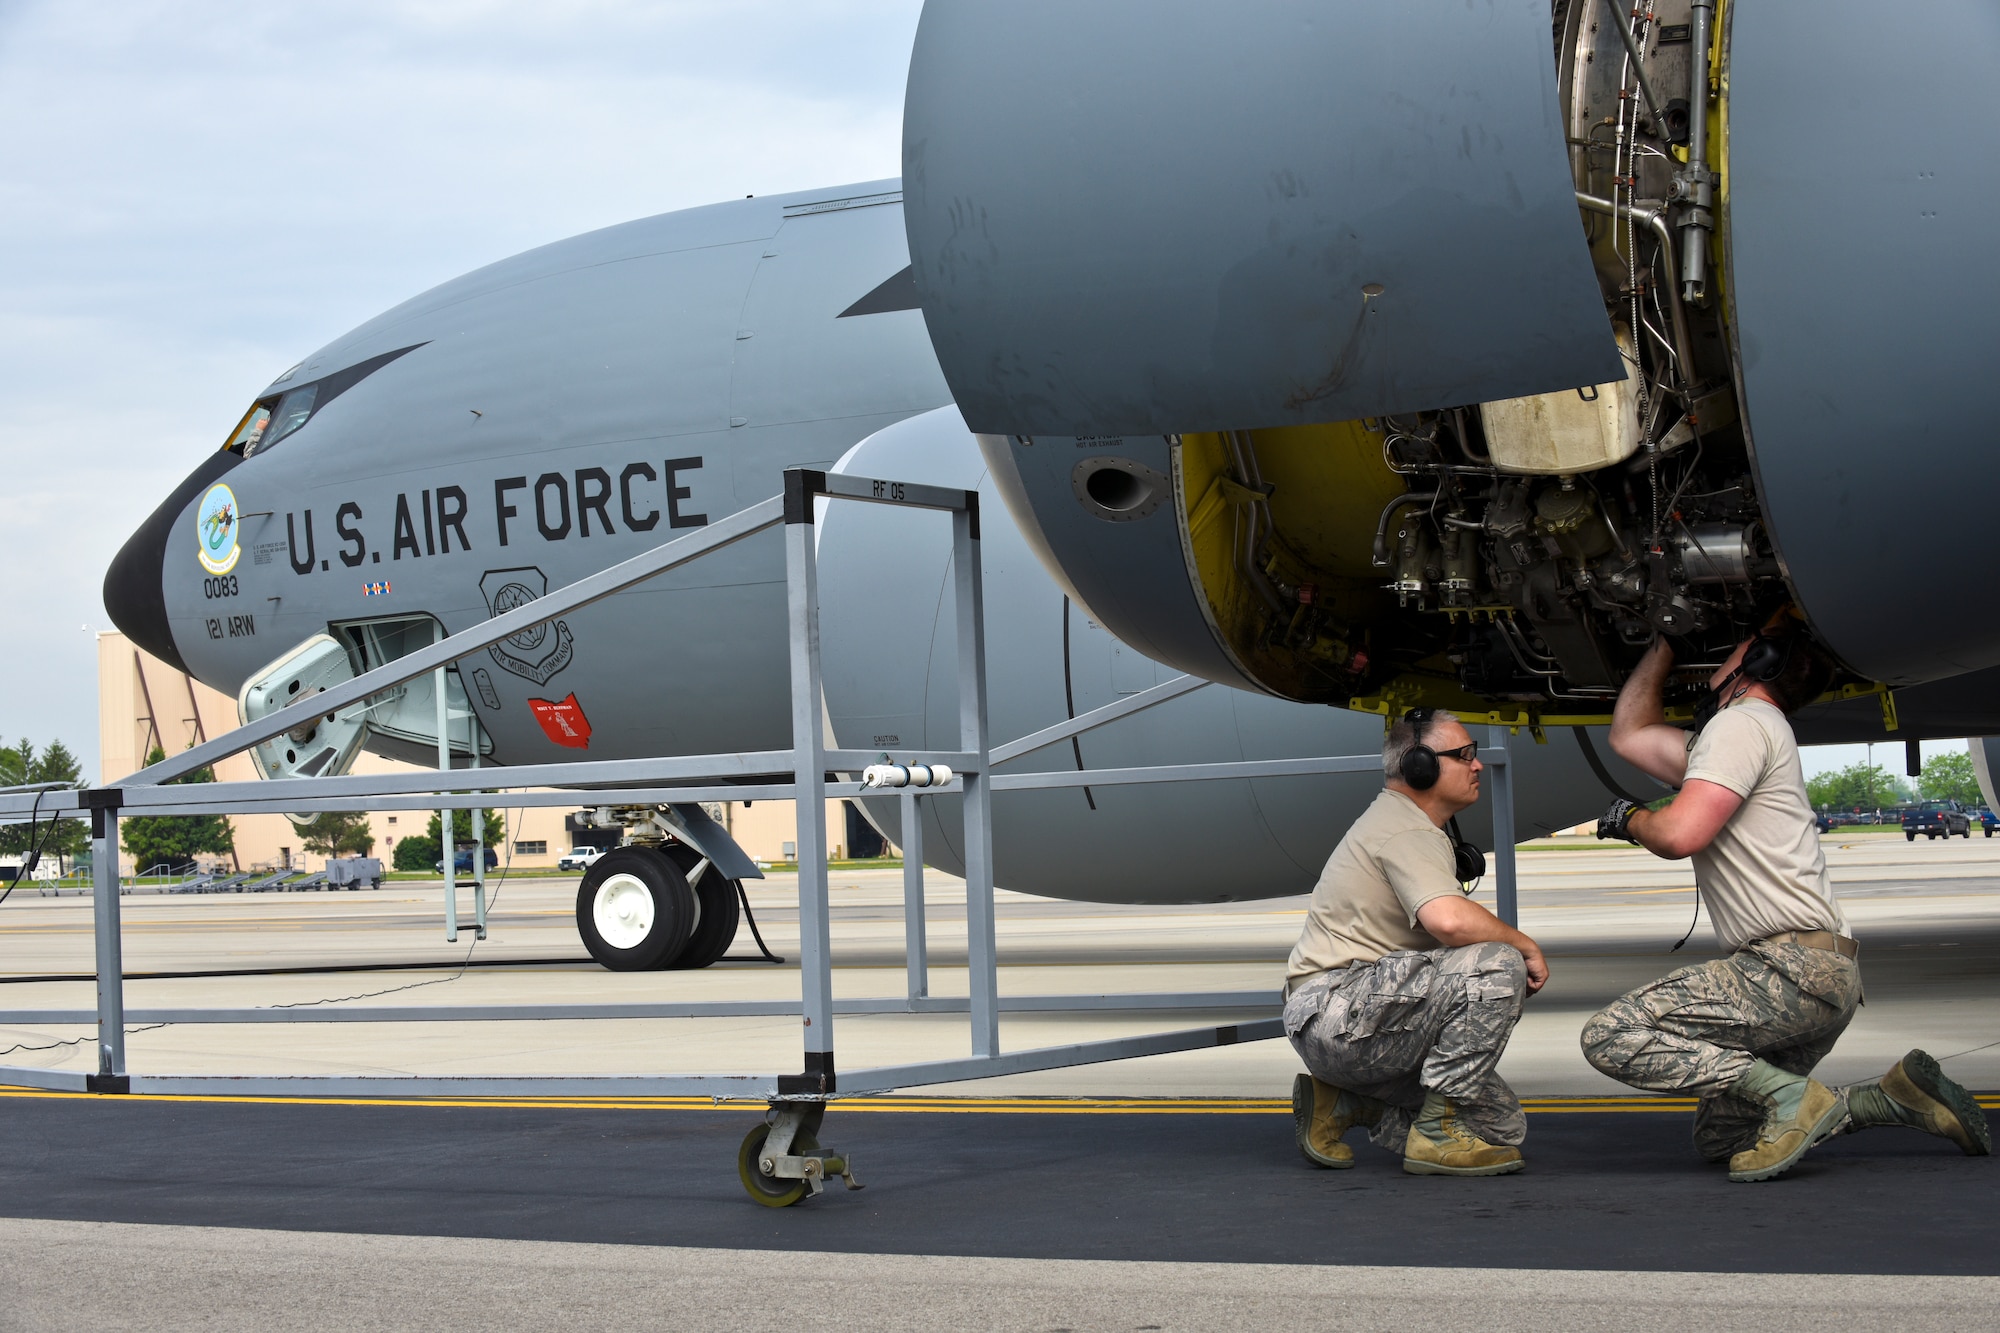 A KC-135 Stratotanker at the 121st Air Refueling Wing, Rickenbacker Air National Guard Base, Ohio, receives new artwork, to include a block “O” on the tail flash, racing stripes down the sides, “eyebrow” painting over the pilot and co-pilot’s windows, and nose art. Over the course of their normal maintenance schedule, the rest of the 121 ARW aircraft will receive the new artwork as well. (U.S. Air National Guard photo by Senior Airman Wendy Kuhn/Released)